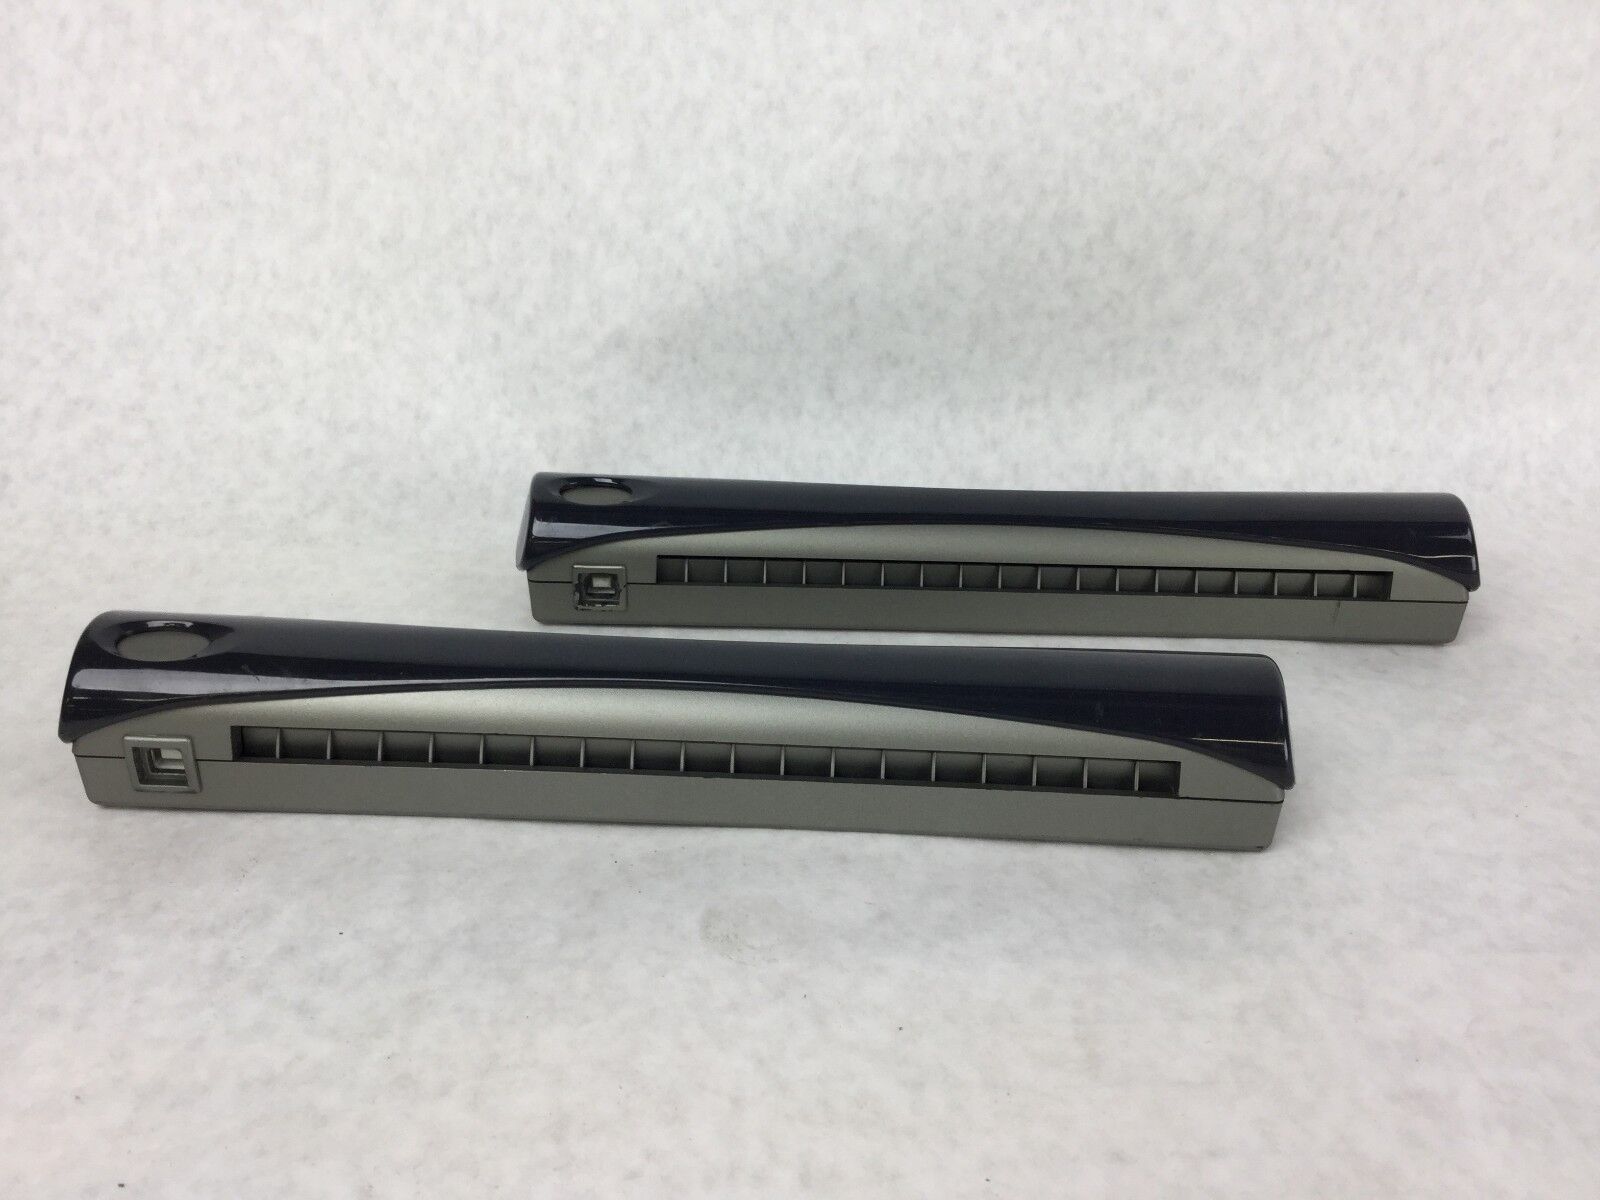 Ambir Technology PS467 Scanner, Lot of 2,Parts or Repair-Wont Feed